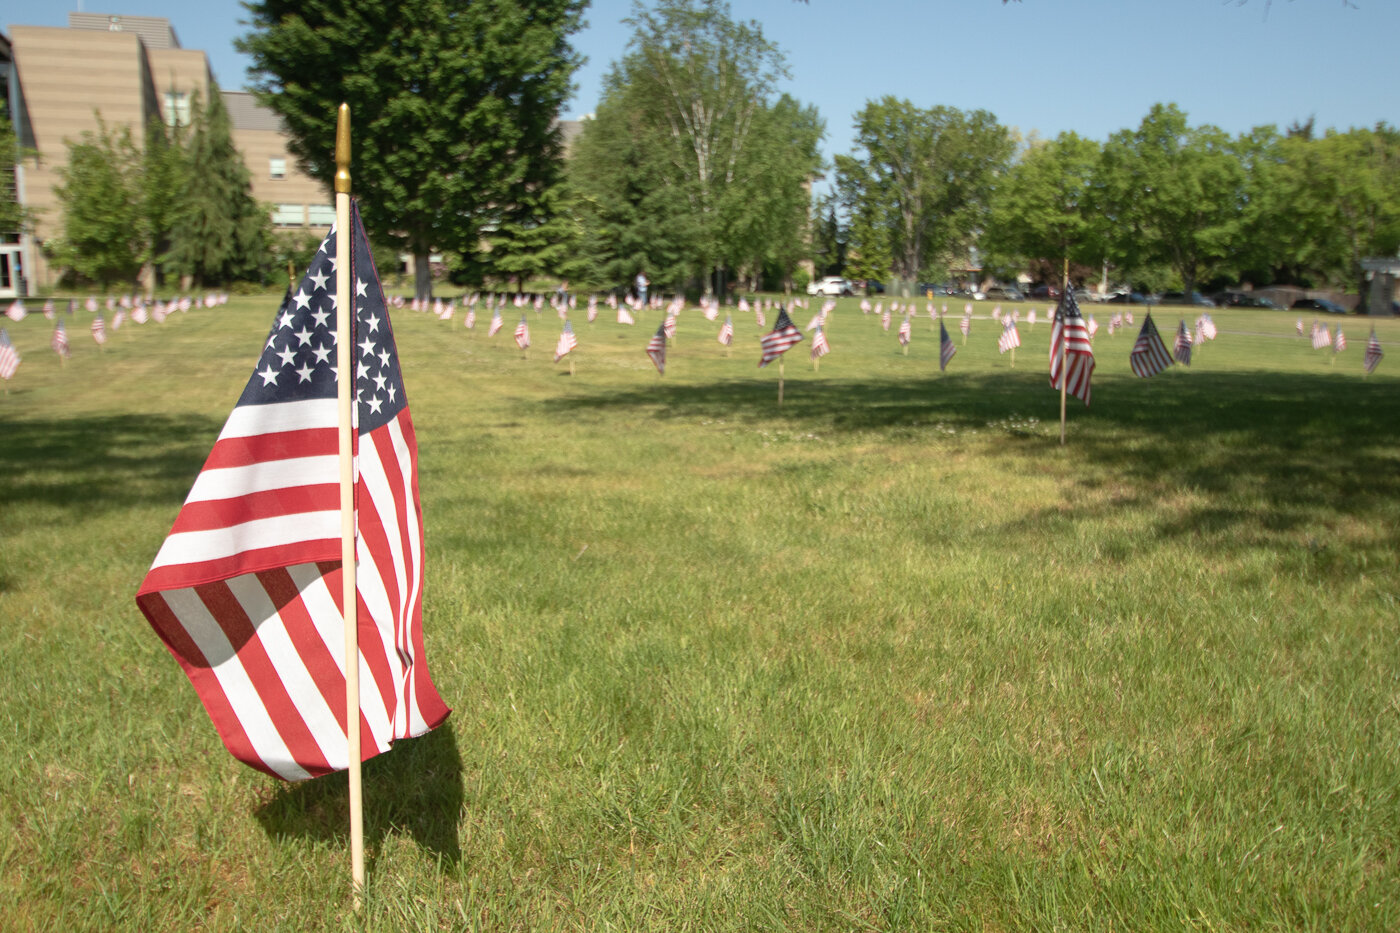 Flags are seen on display Thursday morning in the field north of Centralia College's clock tower as part of the school's Memorial Day ceremony.